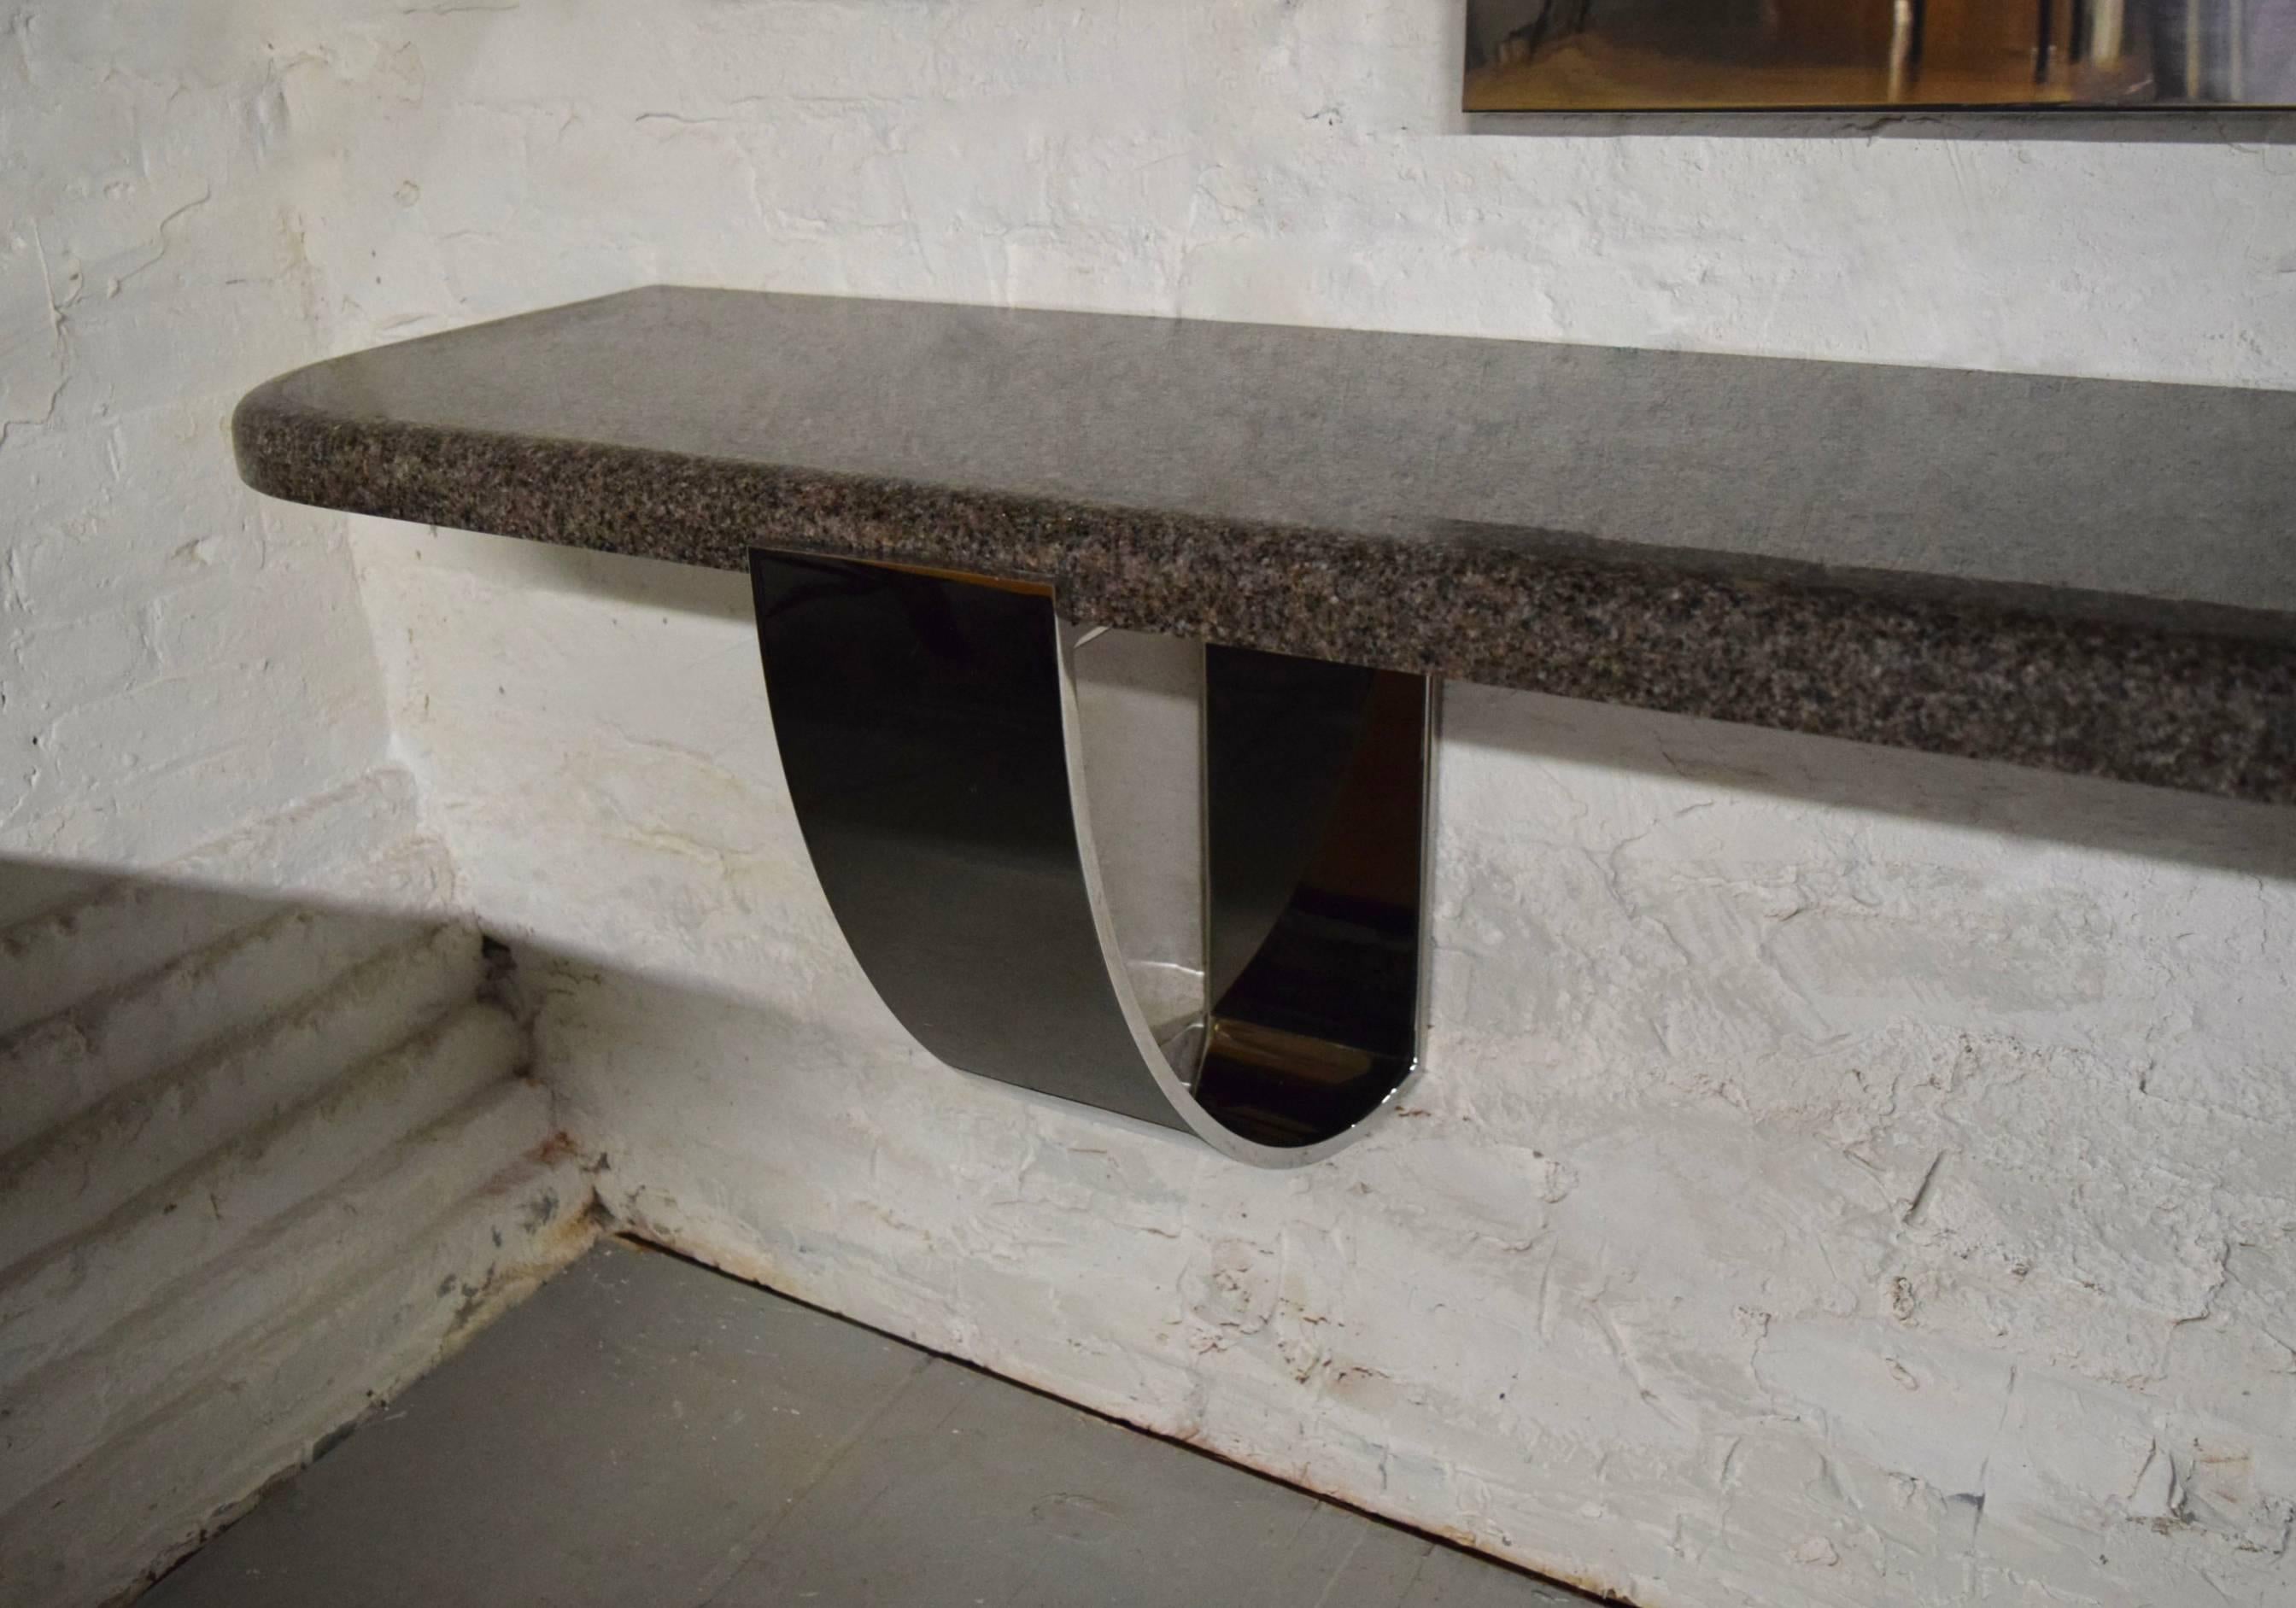 20th Century Polished Steel and Granite Console by Alessandro Albrizzi  circa 1975 Italy